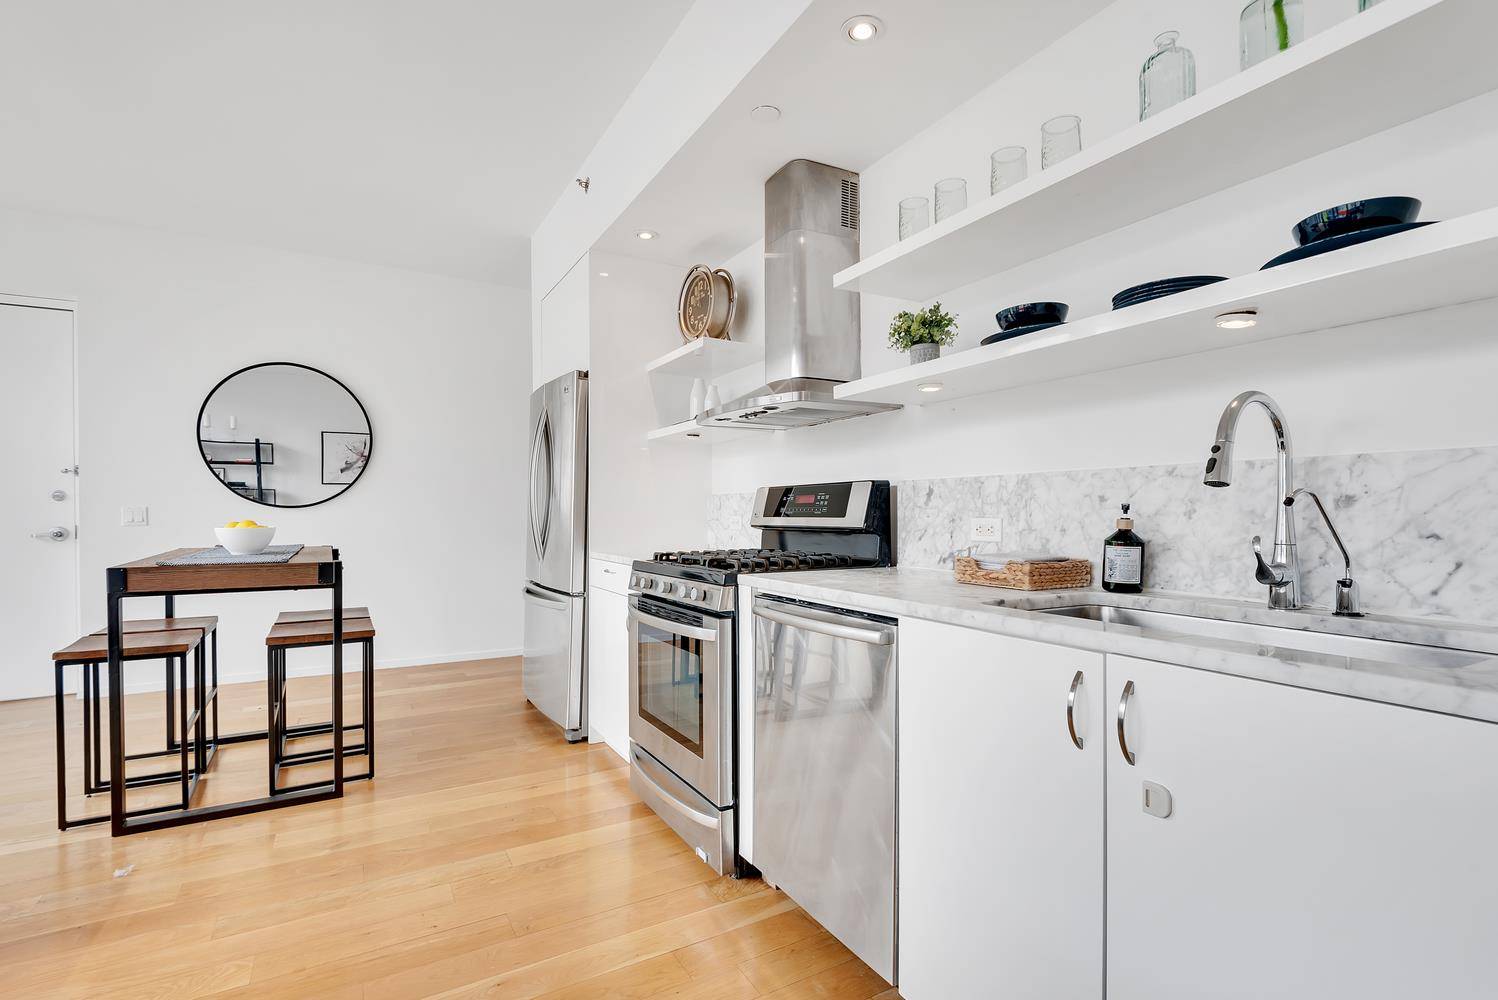 Fabulous light bathed 2 bedroom, 2 bathroom luxury apartment in the heart of Park Slope !